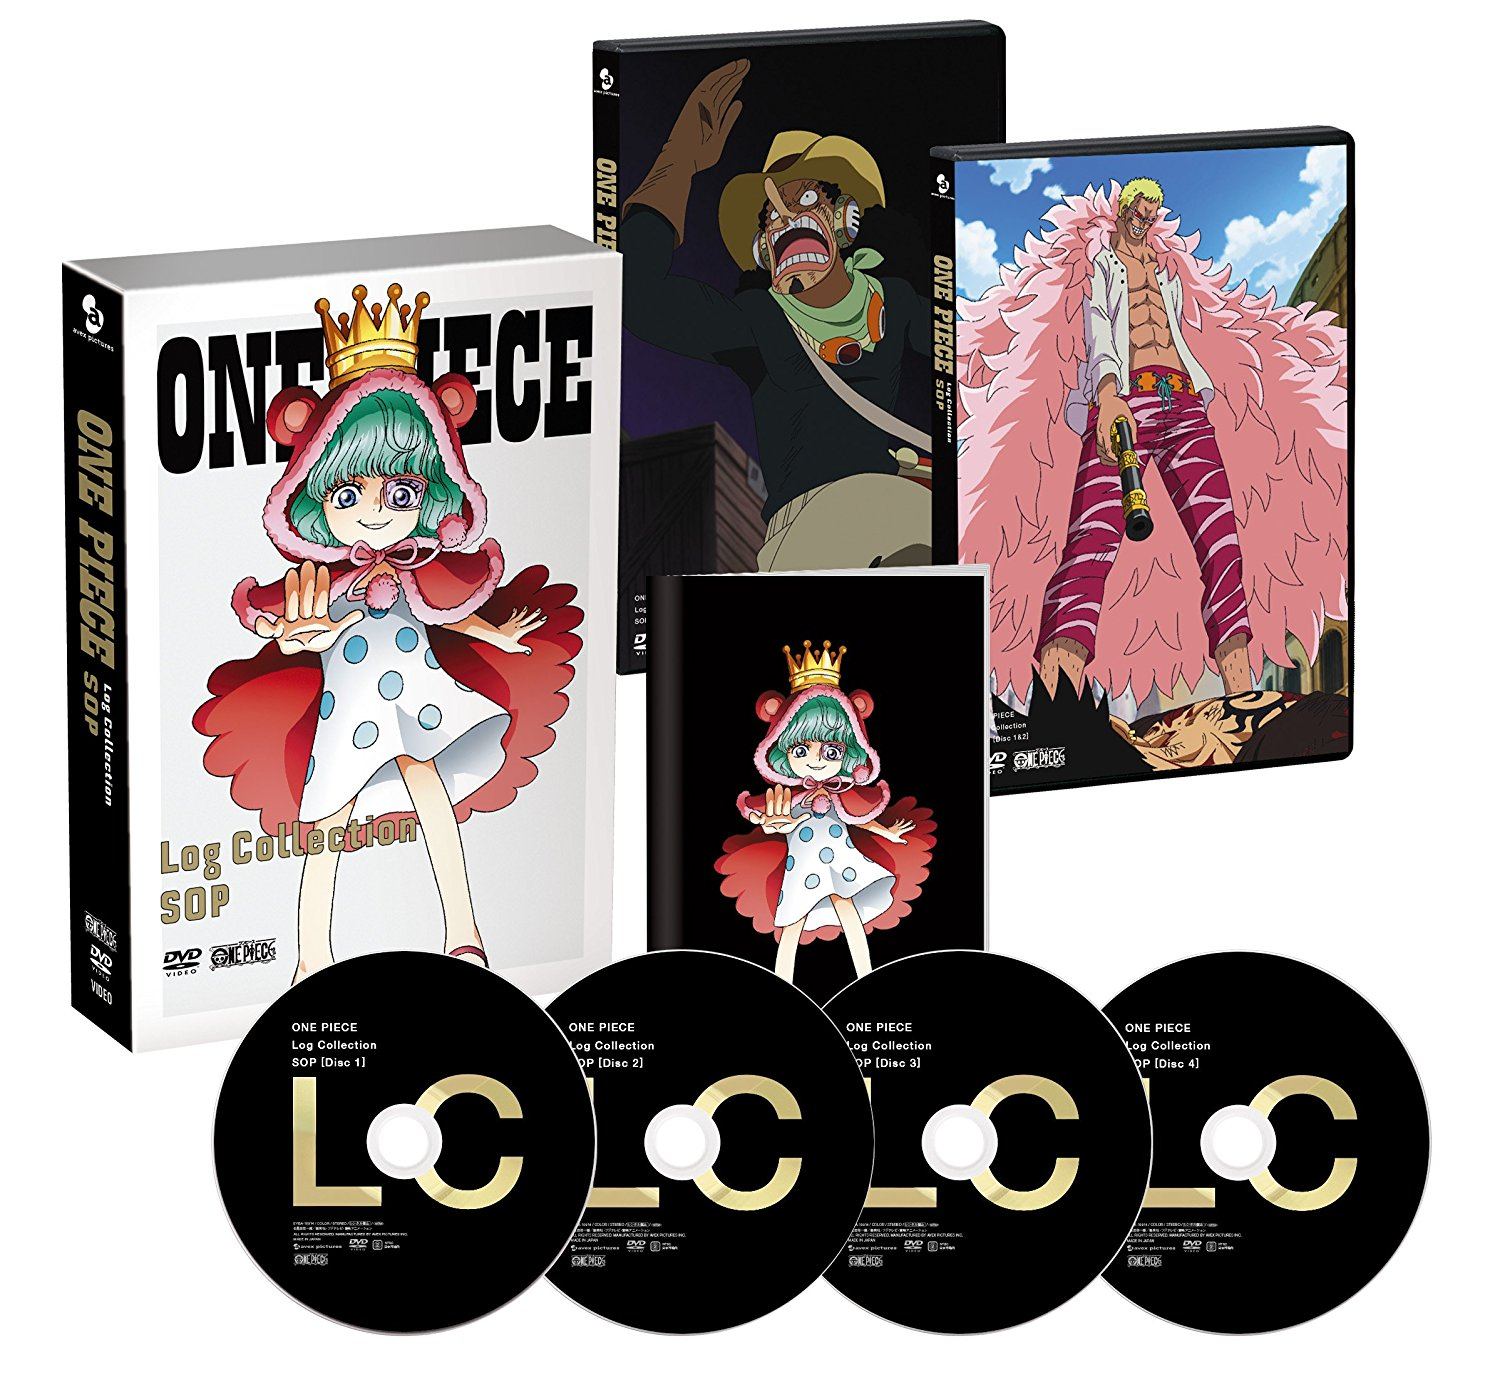 One Piece Log Collection - Sop